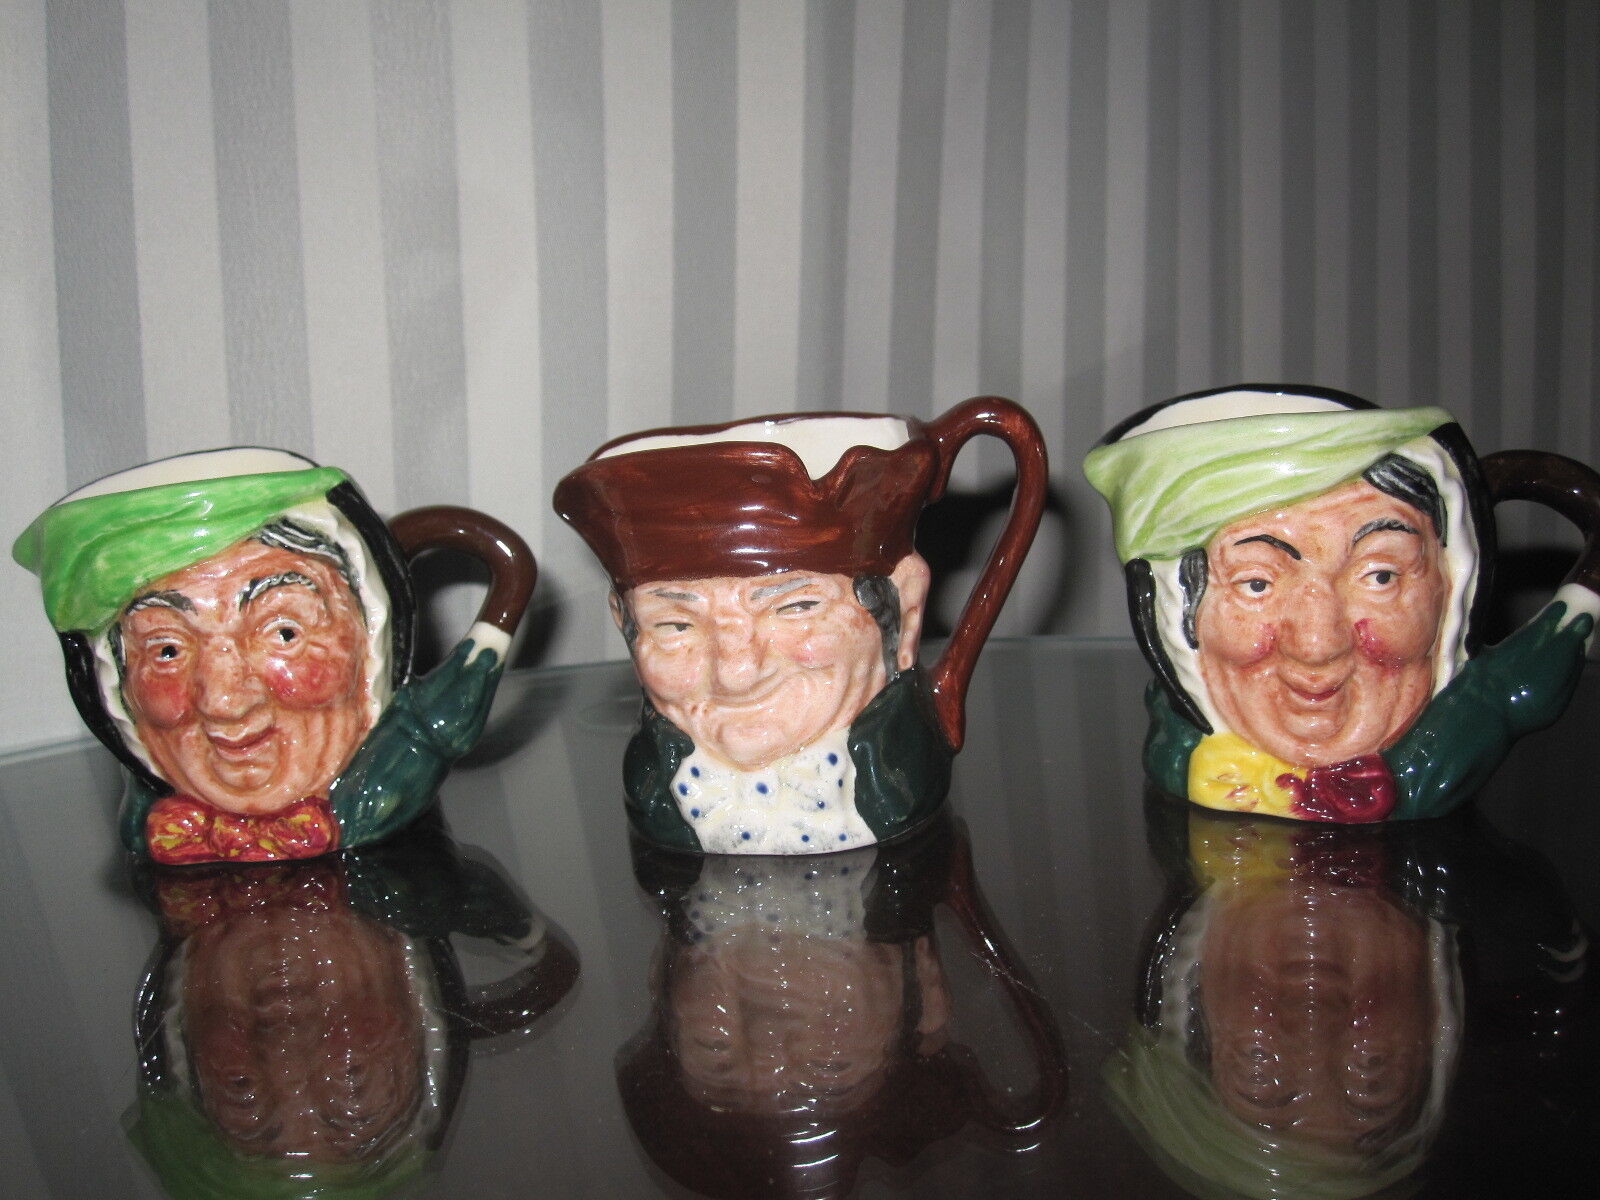 SET OF 3 ROYAL DOULTON MINIATURE TOBY JUGS-2 DIFFERENT SAIREY GAMP & OLD CHARLEY